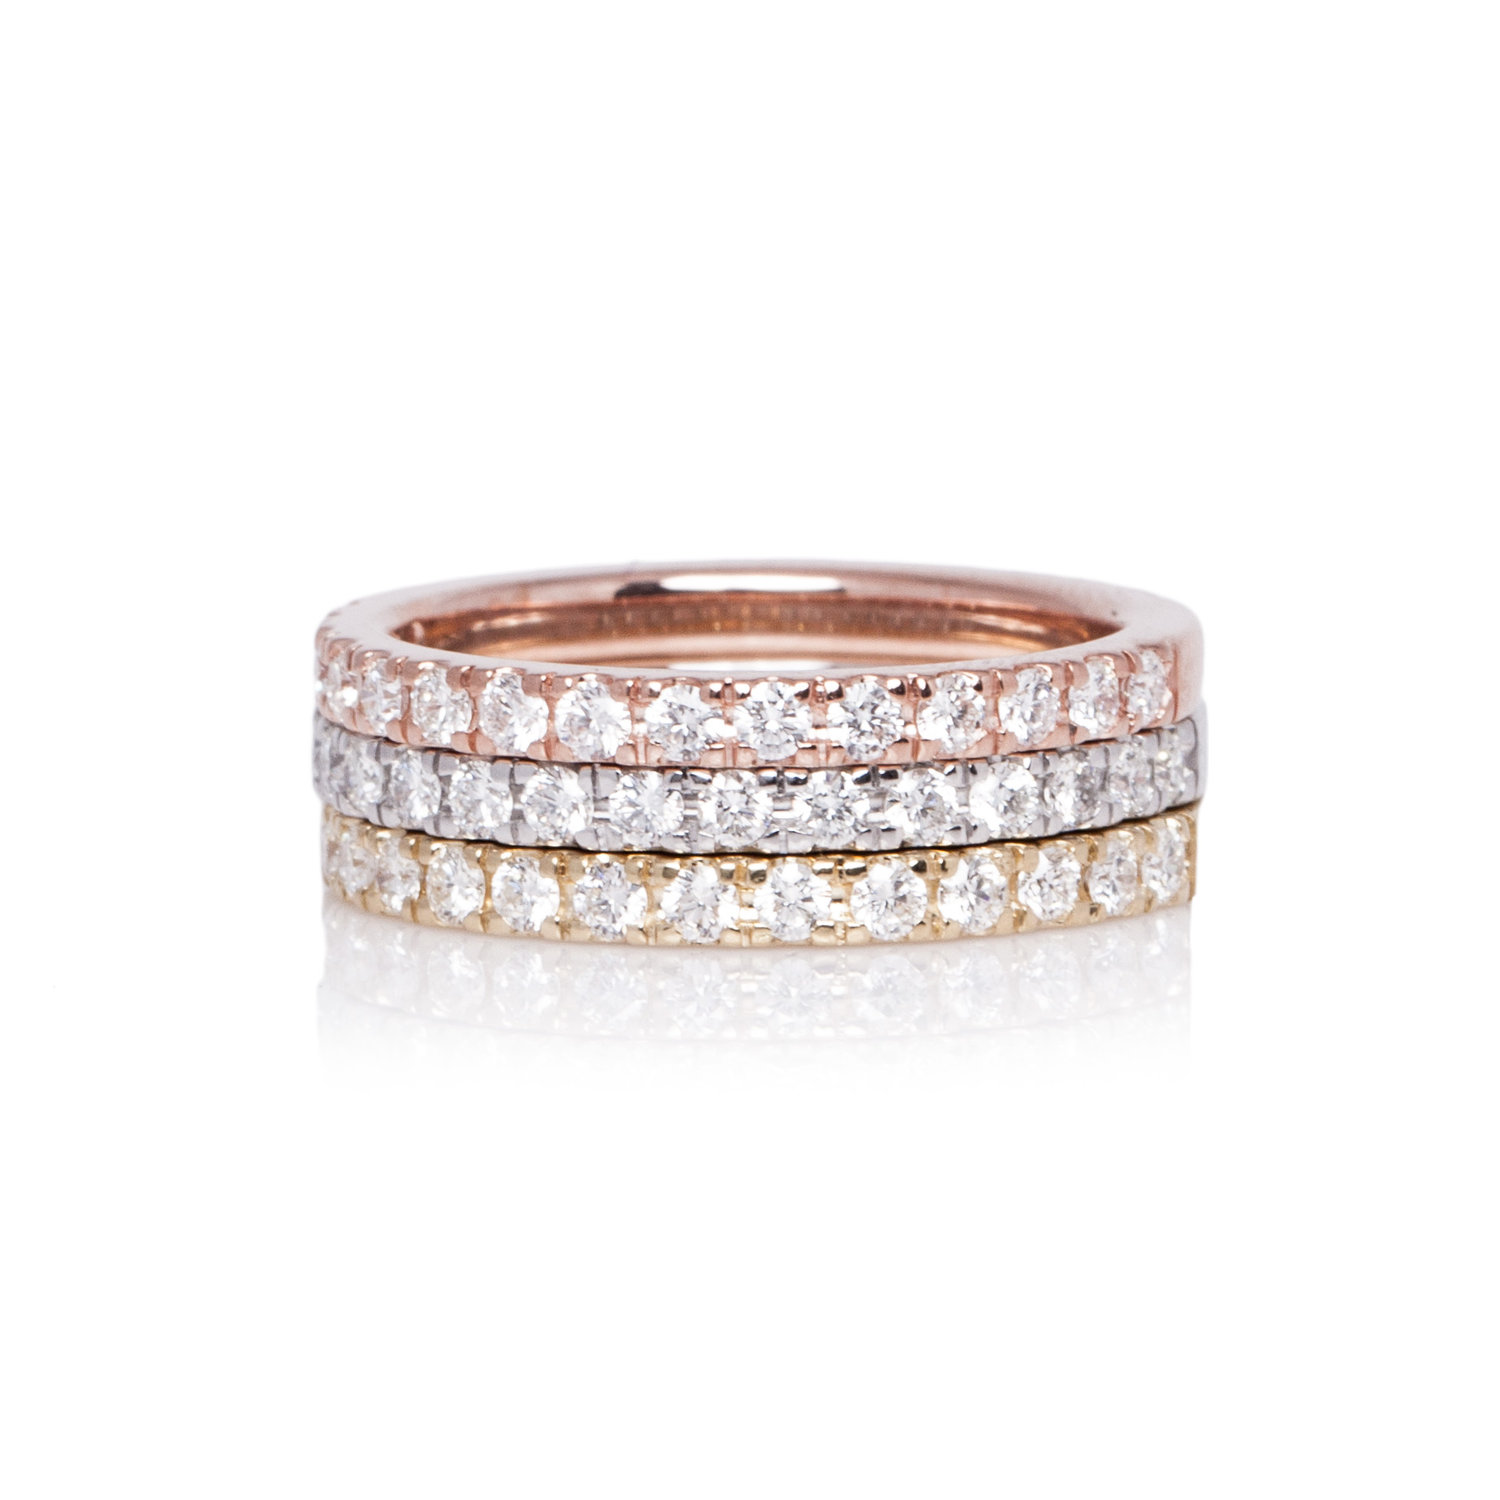 28-continental-jewels-manufacturers-rings-cjr000028-18k-rose-gold-white-gold-yellow-gold-vvs1-diamonds-stacked-rings.jpg